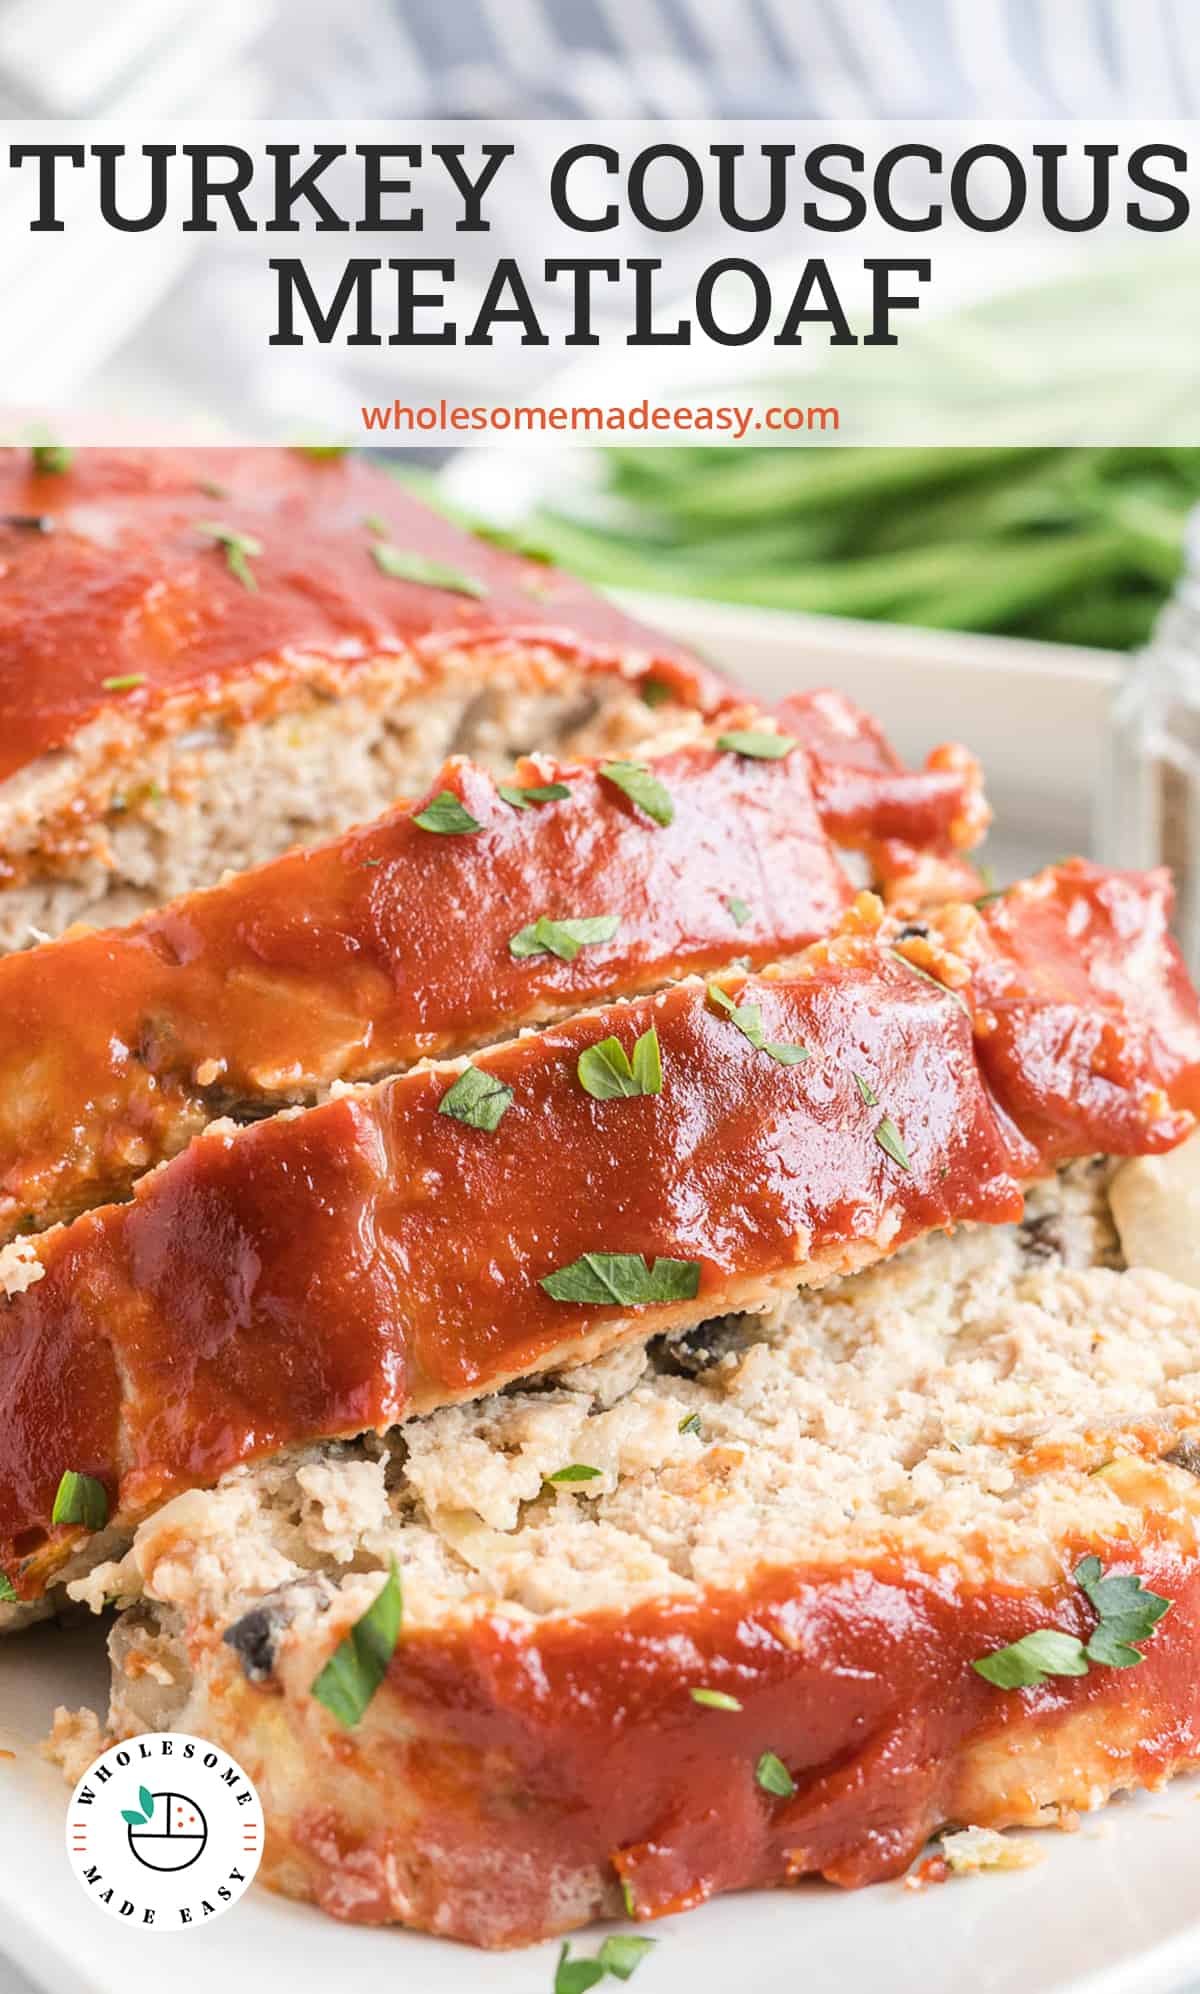 Sliced Turkey Couscous Meatloaf on a platter with text overlay.